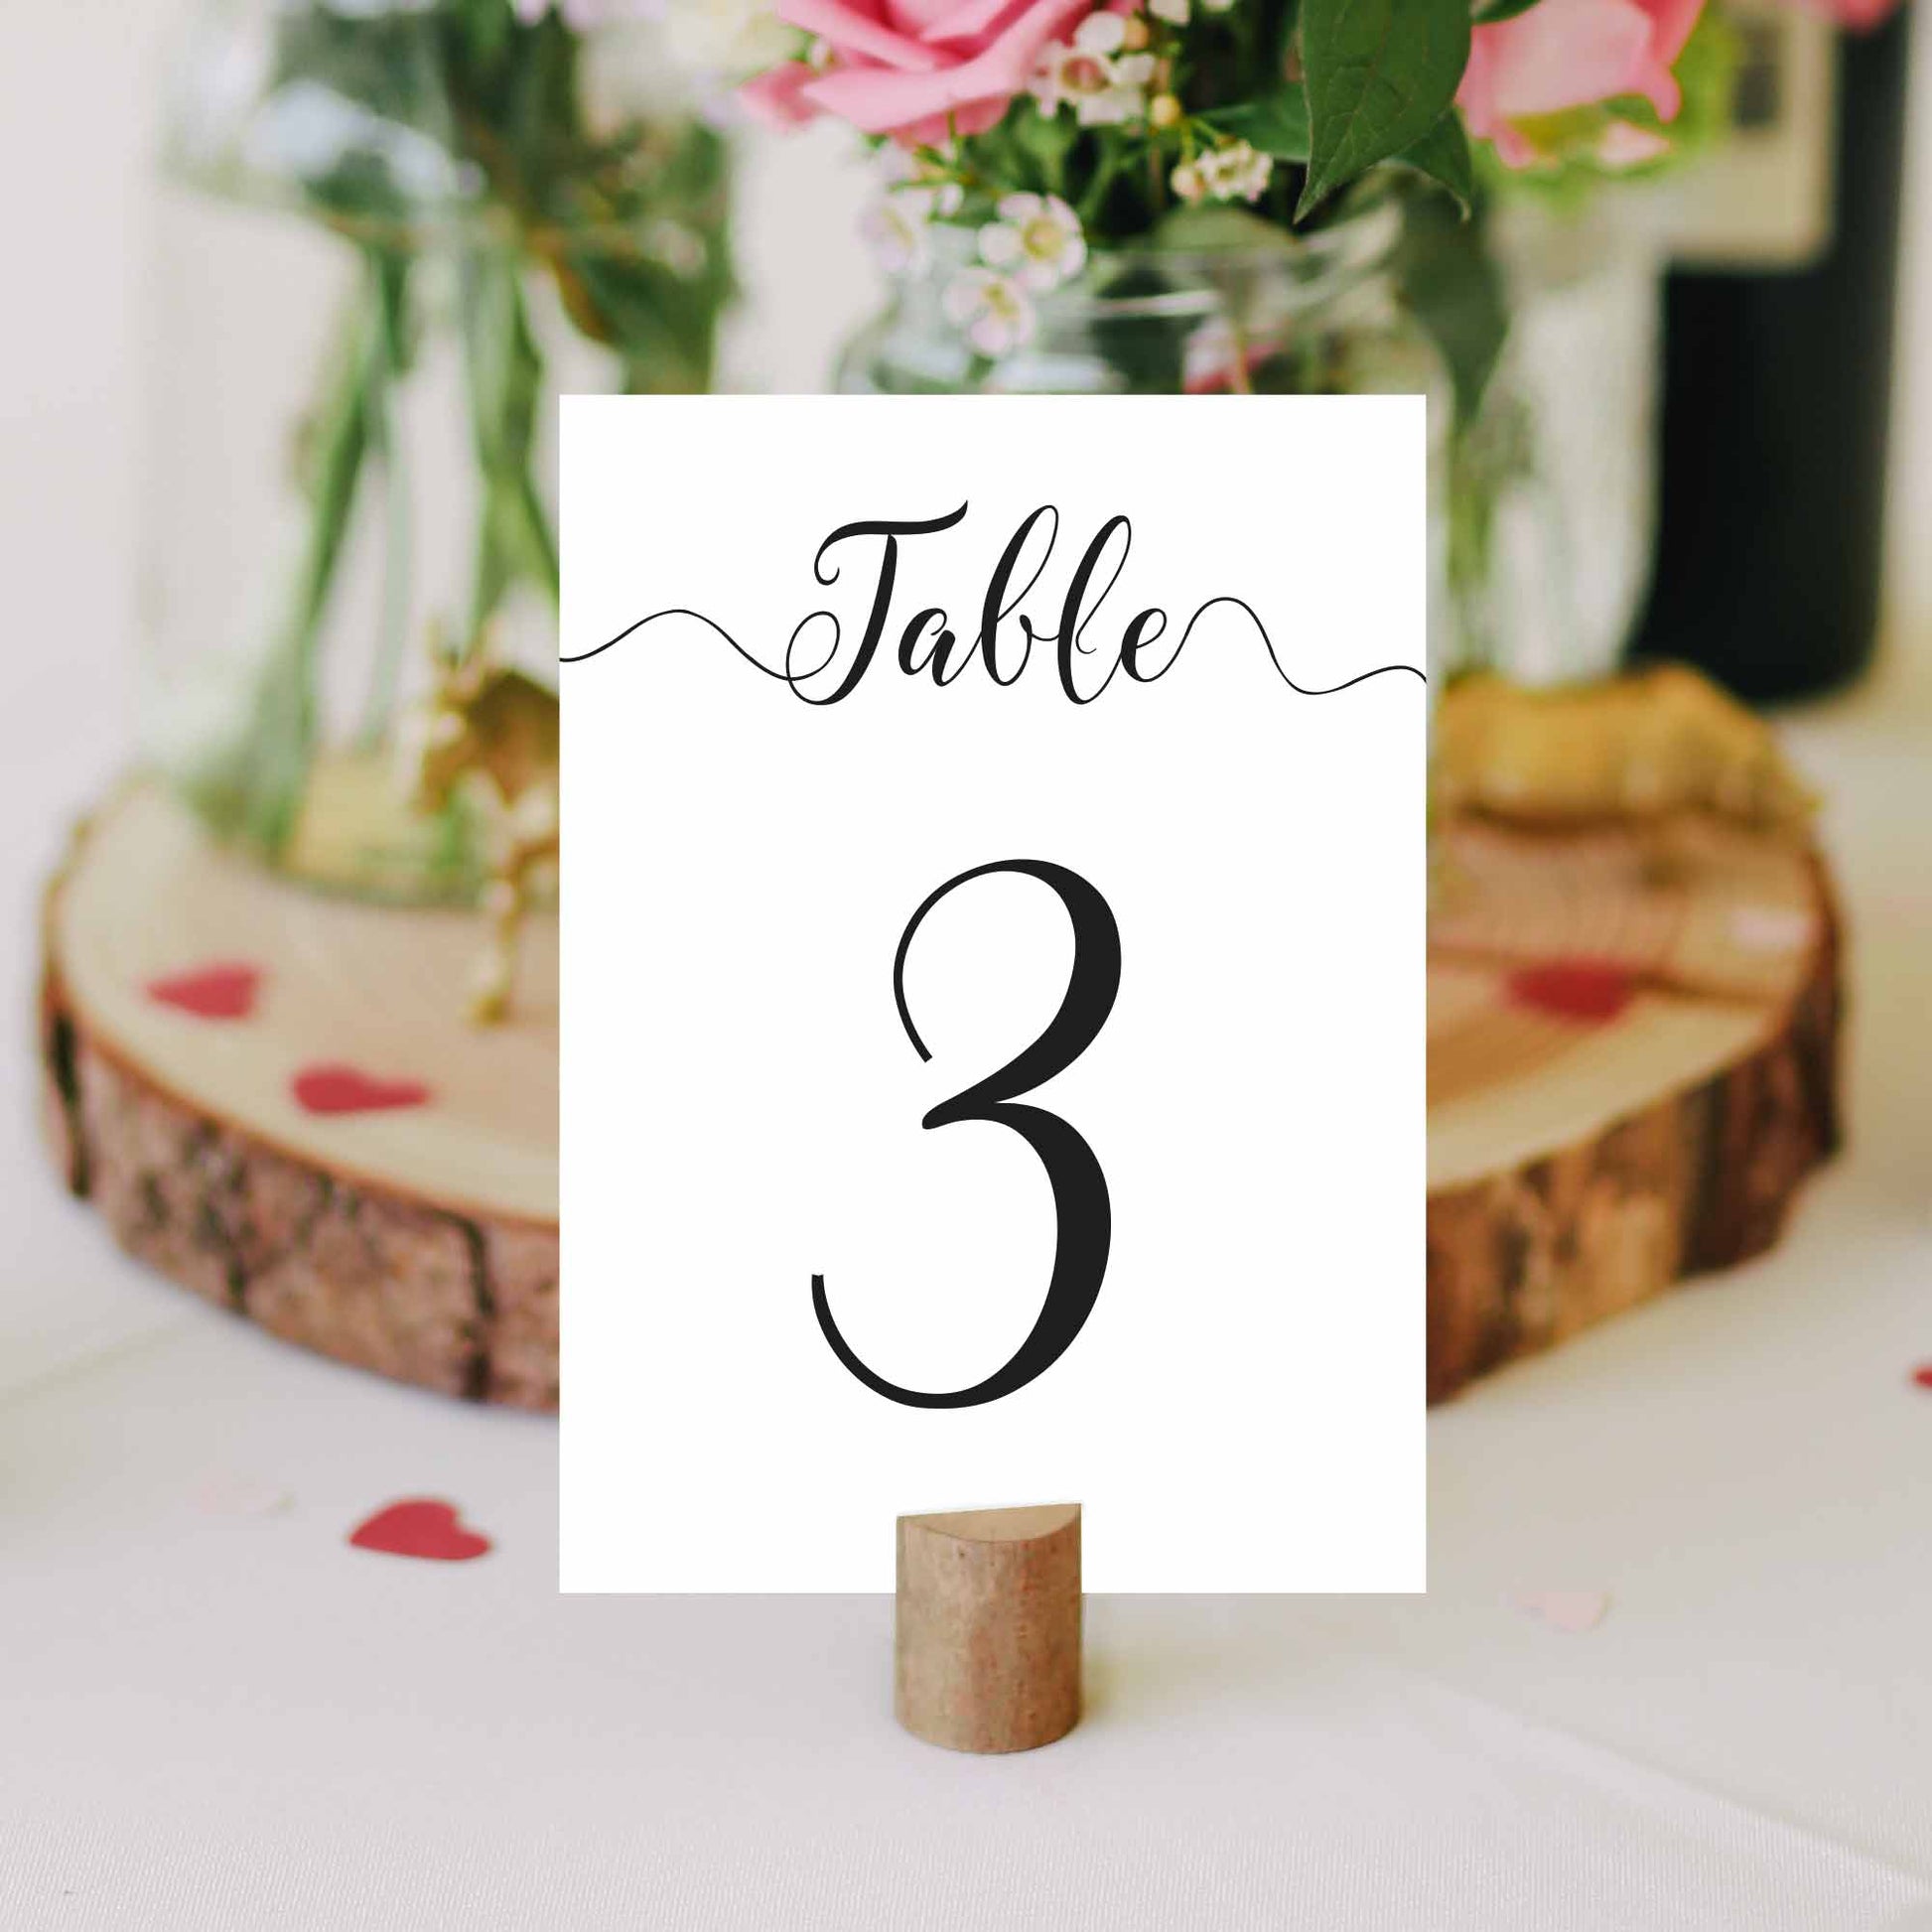 elegant table number on a wedding table with flowers